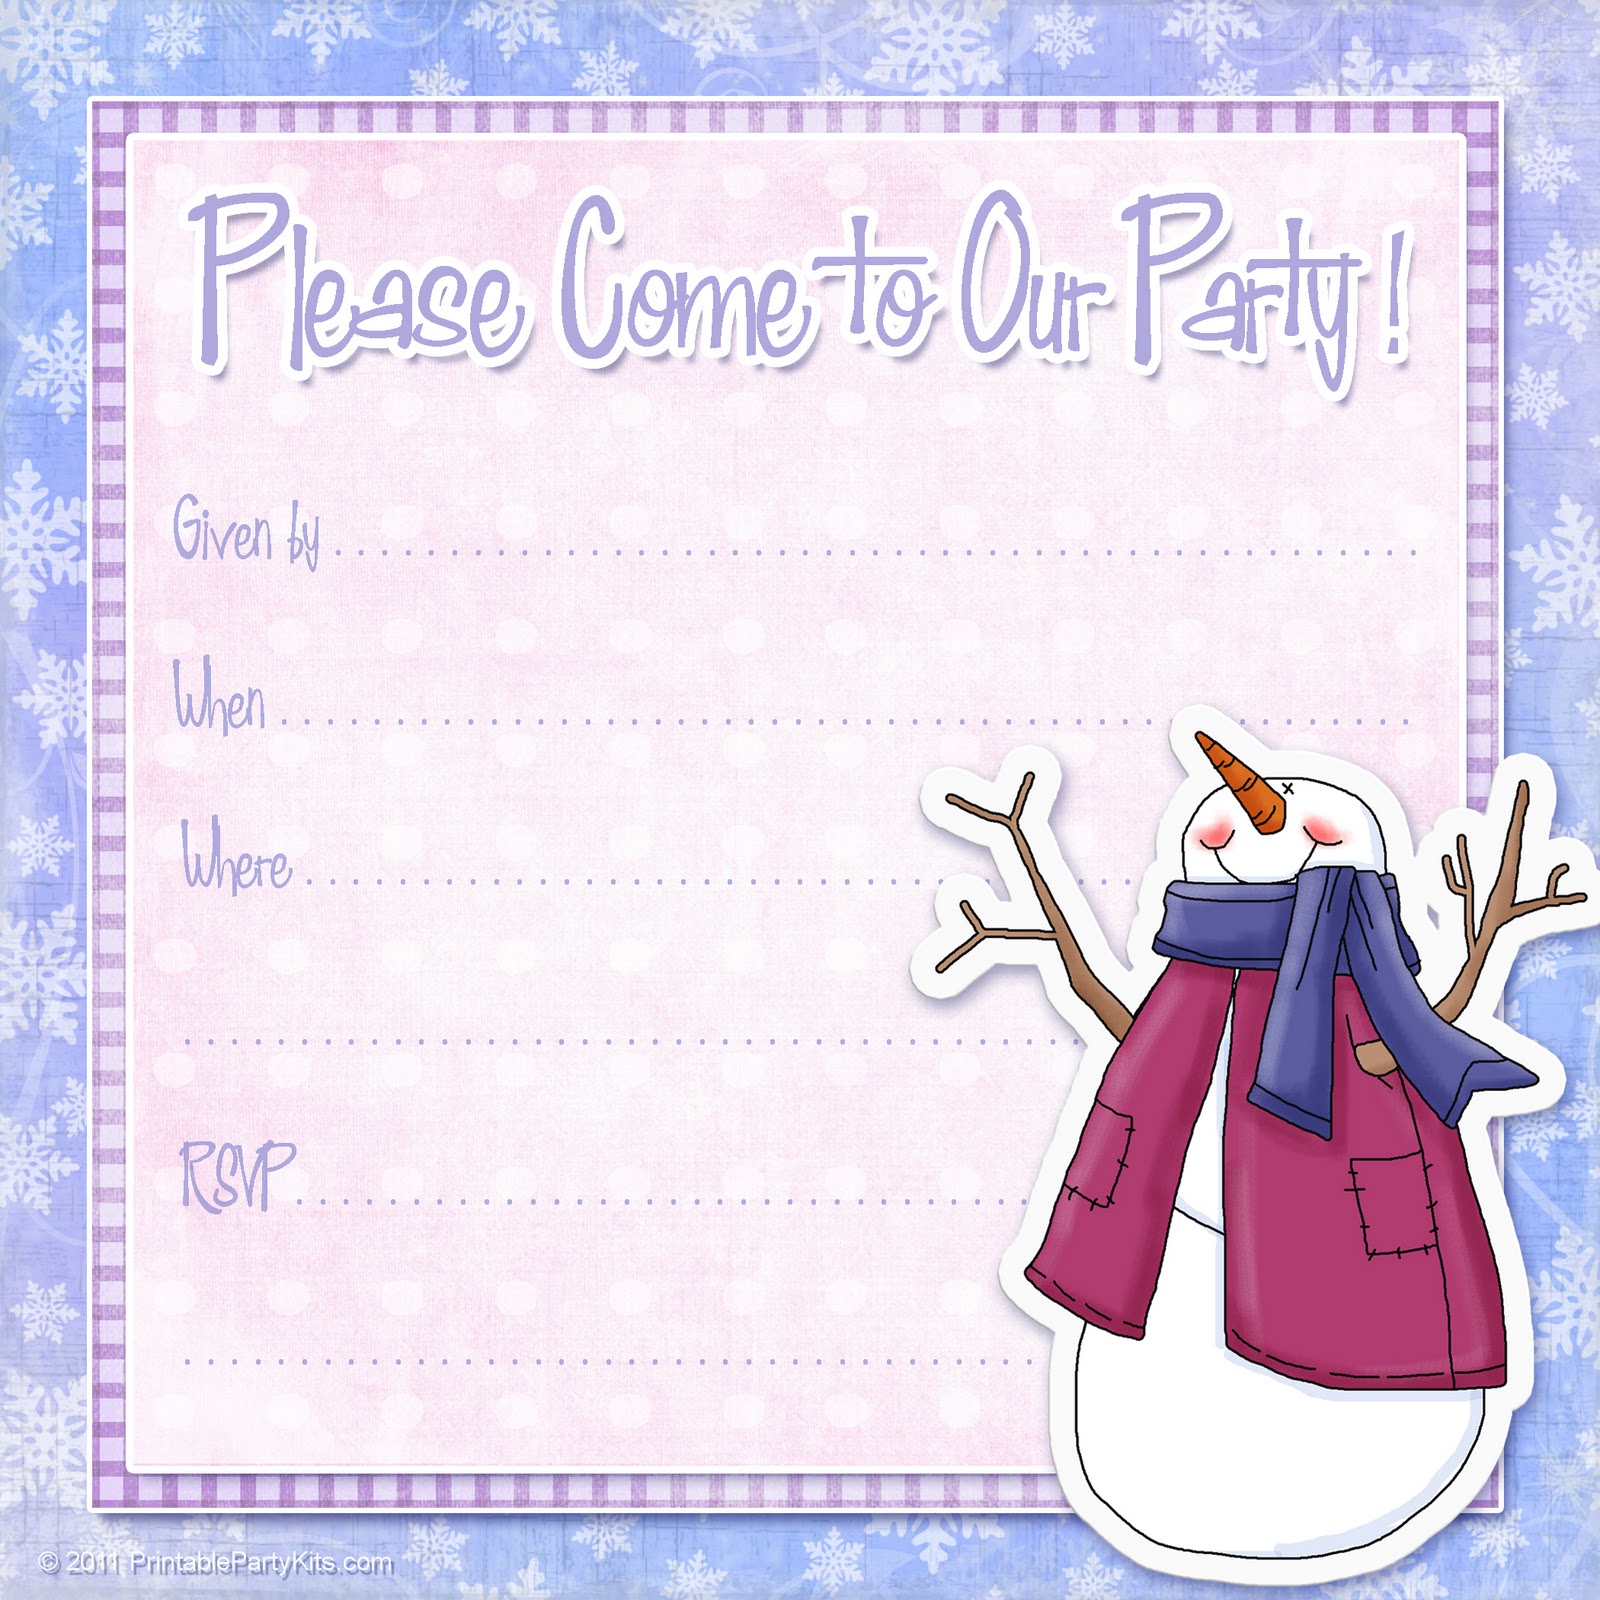 free-printable-party-invitations-free-snowman-invite-template-for-a